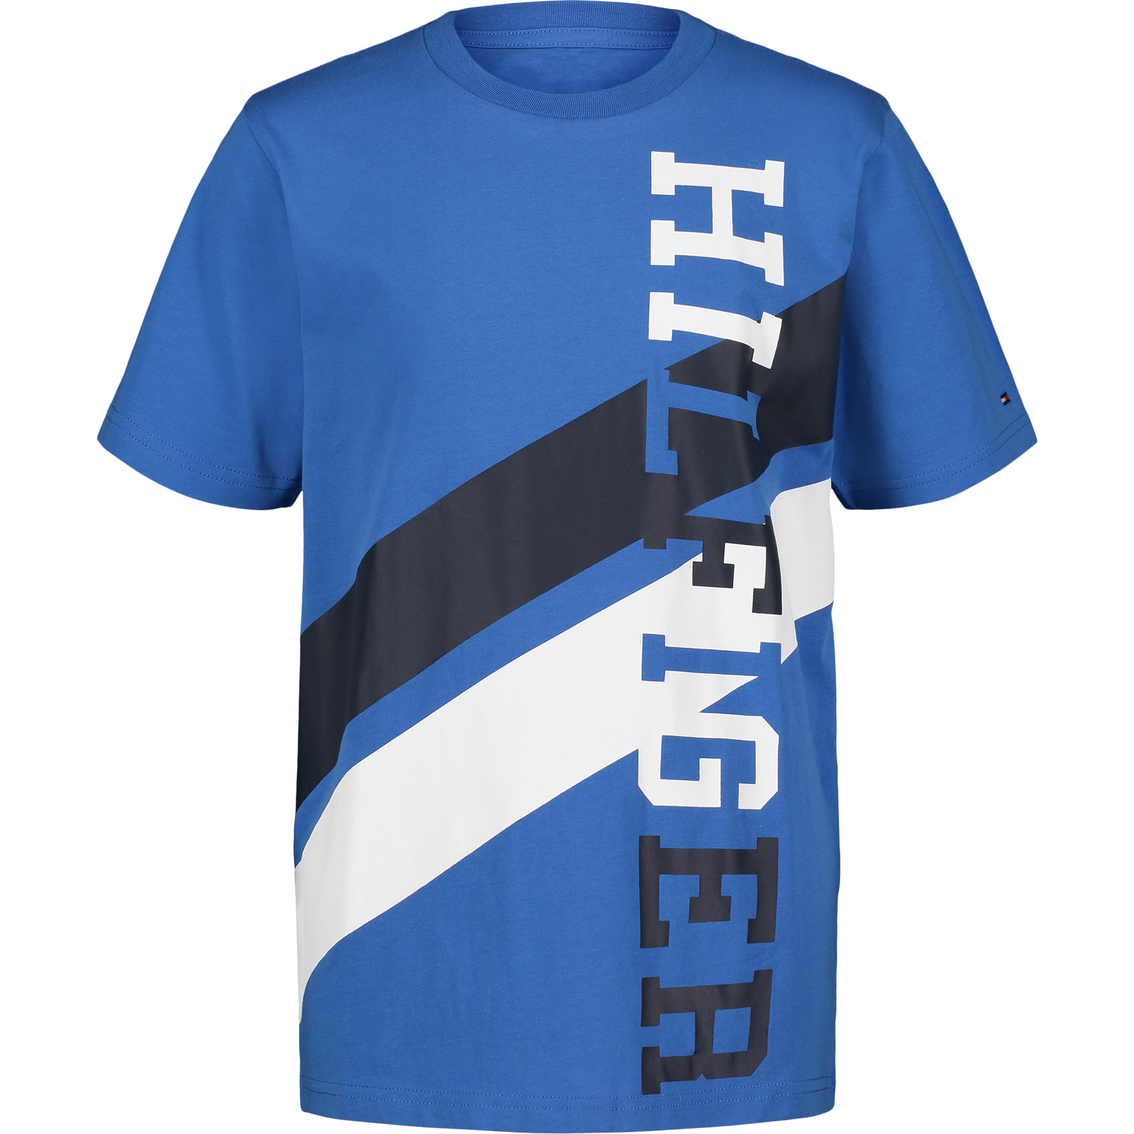 Tommy Hilfiger Varsity Graphic Tee | Boys 8-20 | Clothing & Accessories ...